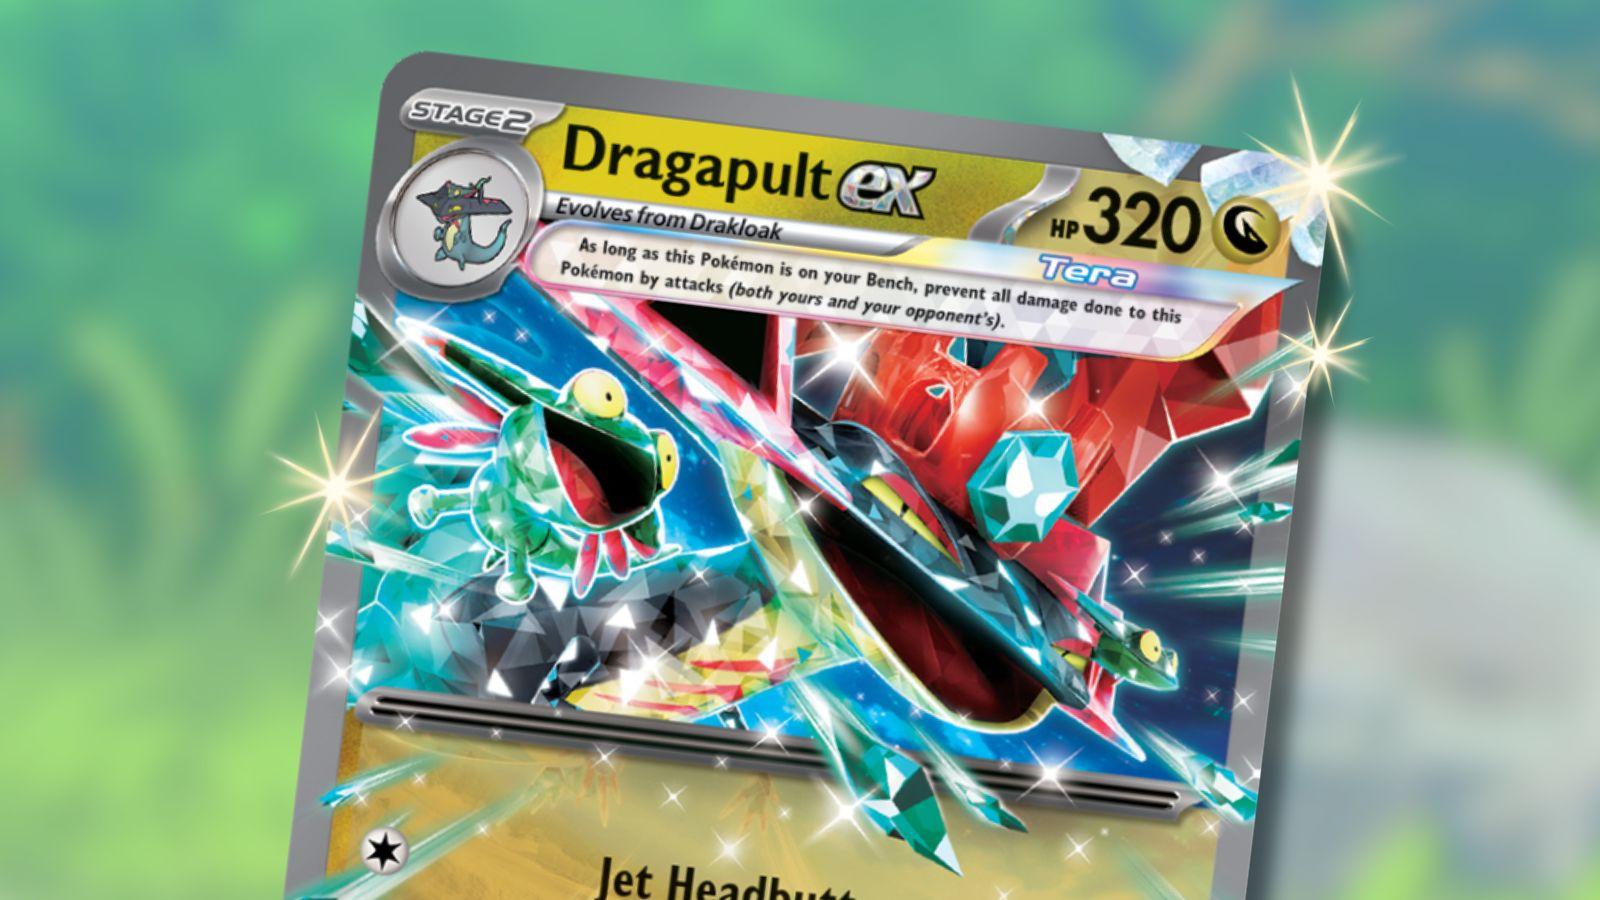 Dragapult ex Pokemon card with anime background.